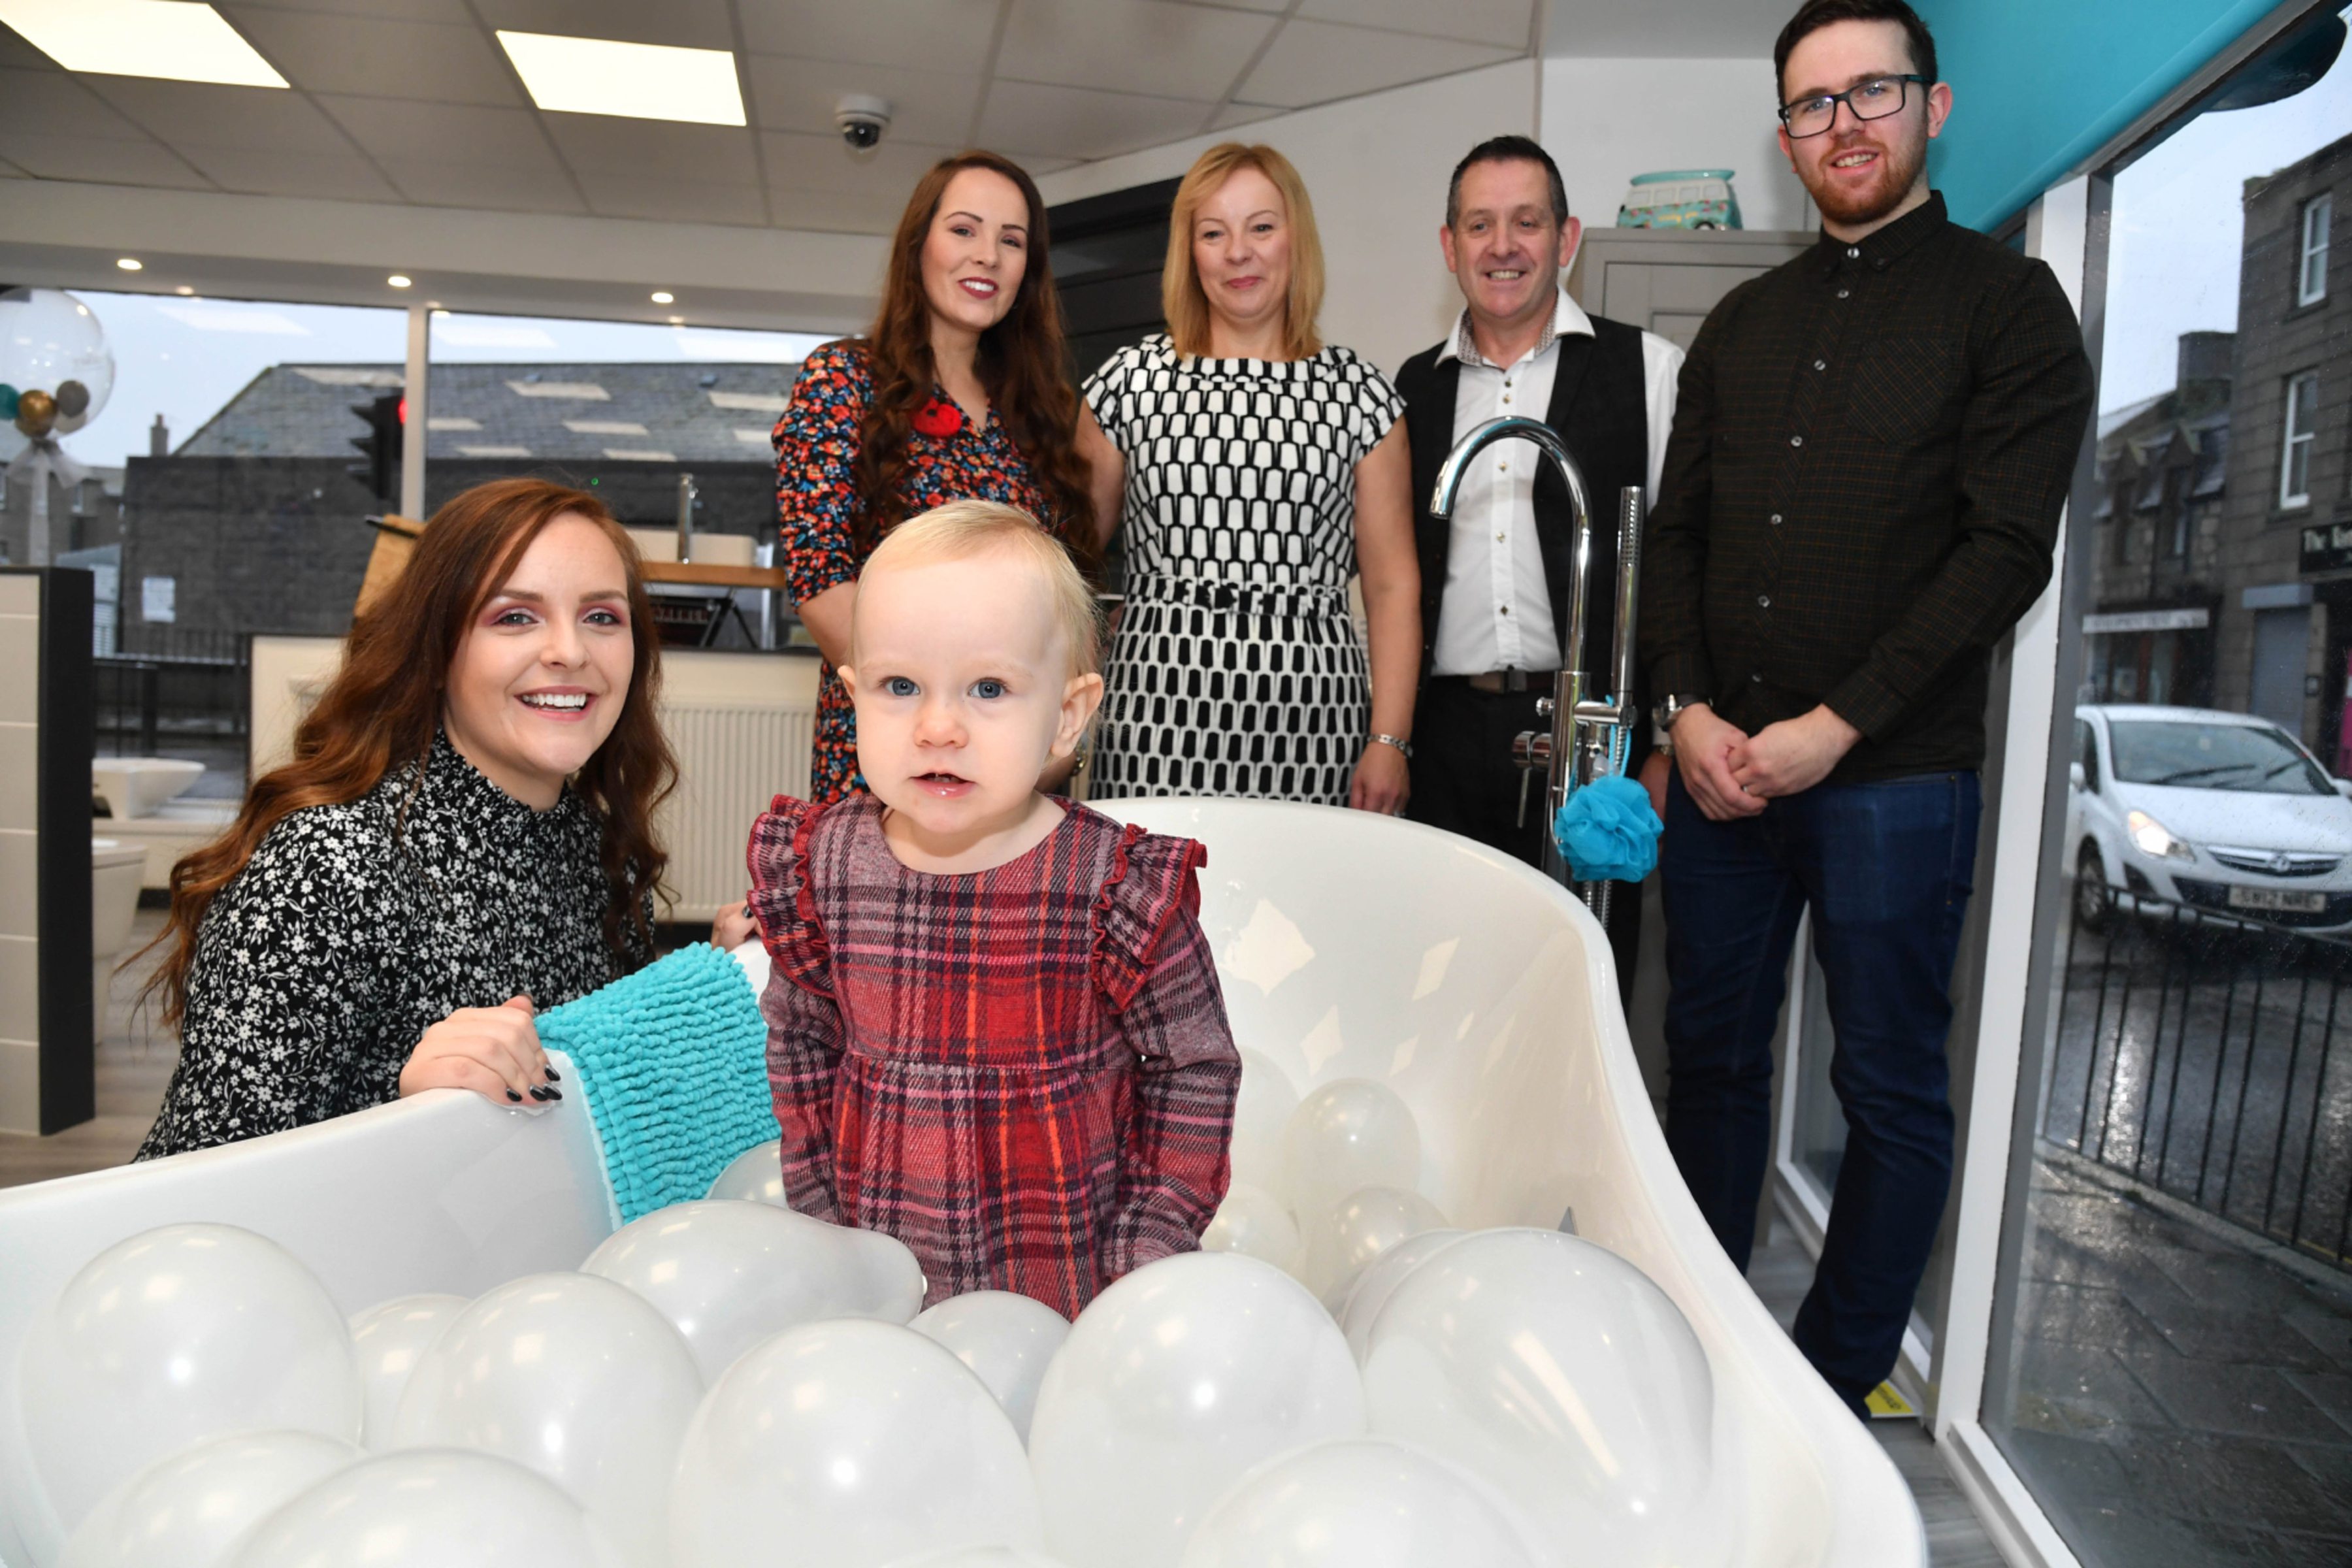 LITTLE CHARLOTTE BUCHAN CAME ALONG TO PERFORM AT THE OPENING OF HER GRANDAD BILLY WALKER'S NEW KITCHEN AND BATHROOM CENTRE IN FRASERBURGH BUT FOUND THE BUBBLE BATH MUCH MORE INTERESTING.LOOKING ON ARE (L TO R ) MUM LISA,AUNTIE EMMA HAY,LINDA AND BILLY WALKER AND DAD STUART BUCHAN.